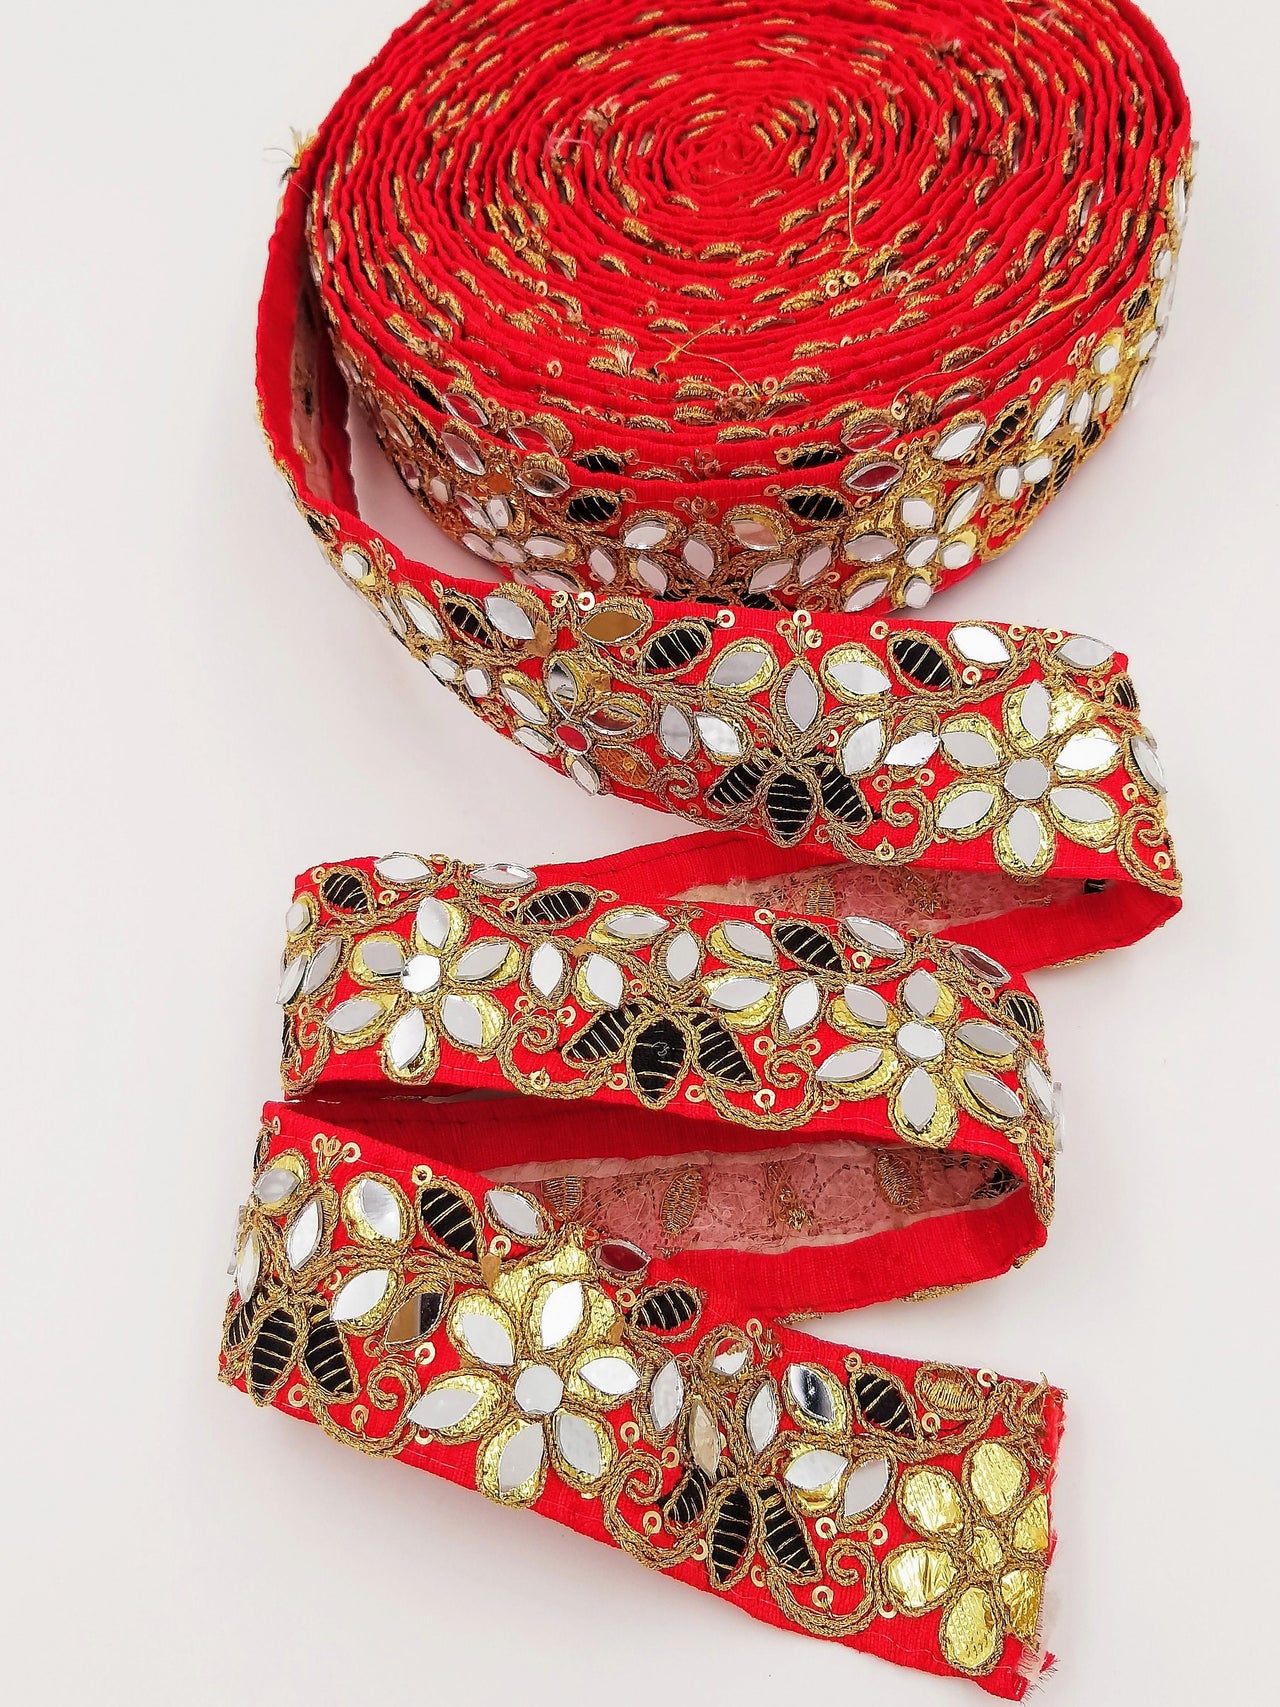 Red Decorative Art Silk Fabric Trim, Mirrored Floral Embroidery, Embroidered Trim In Black and Gold Approx. 40 mm Indian Laces